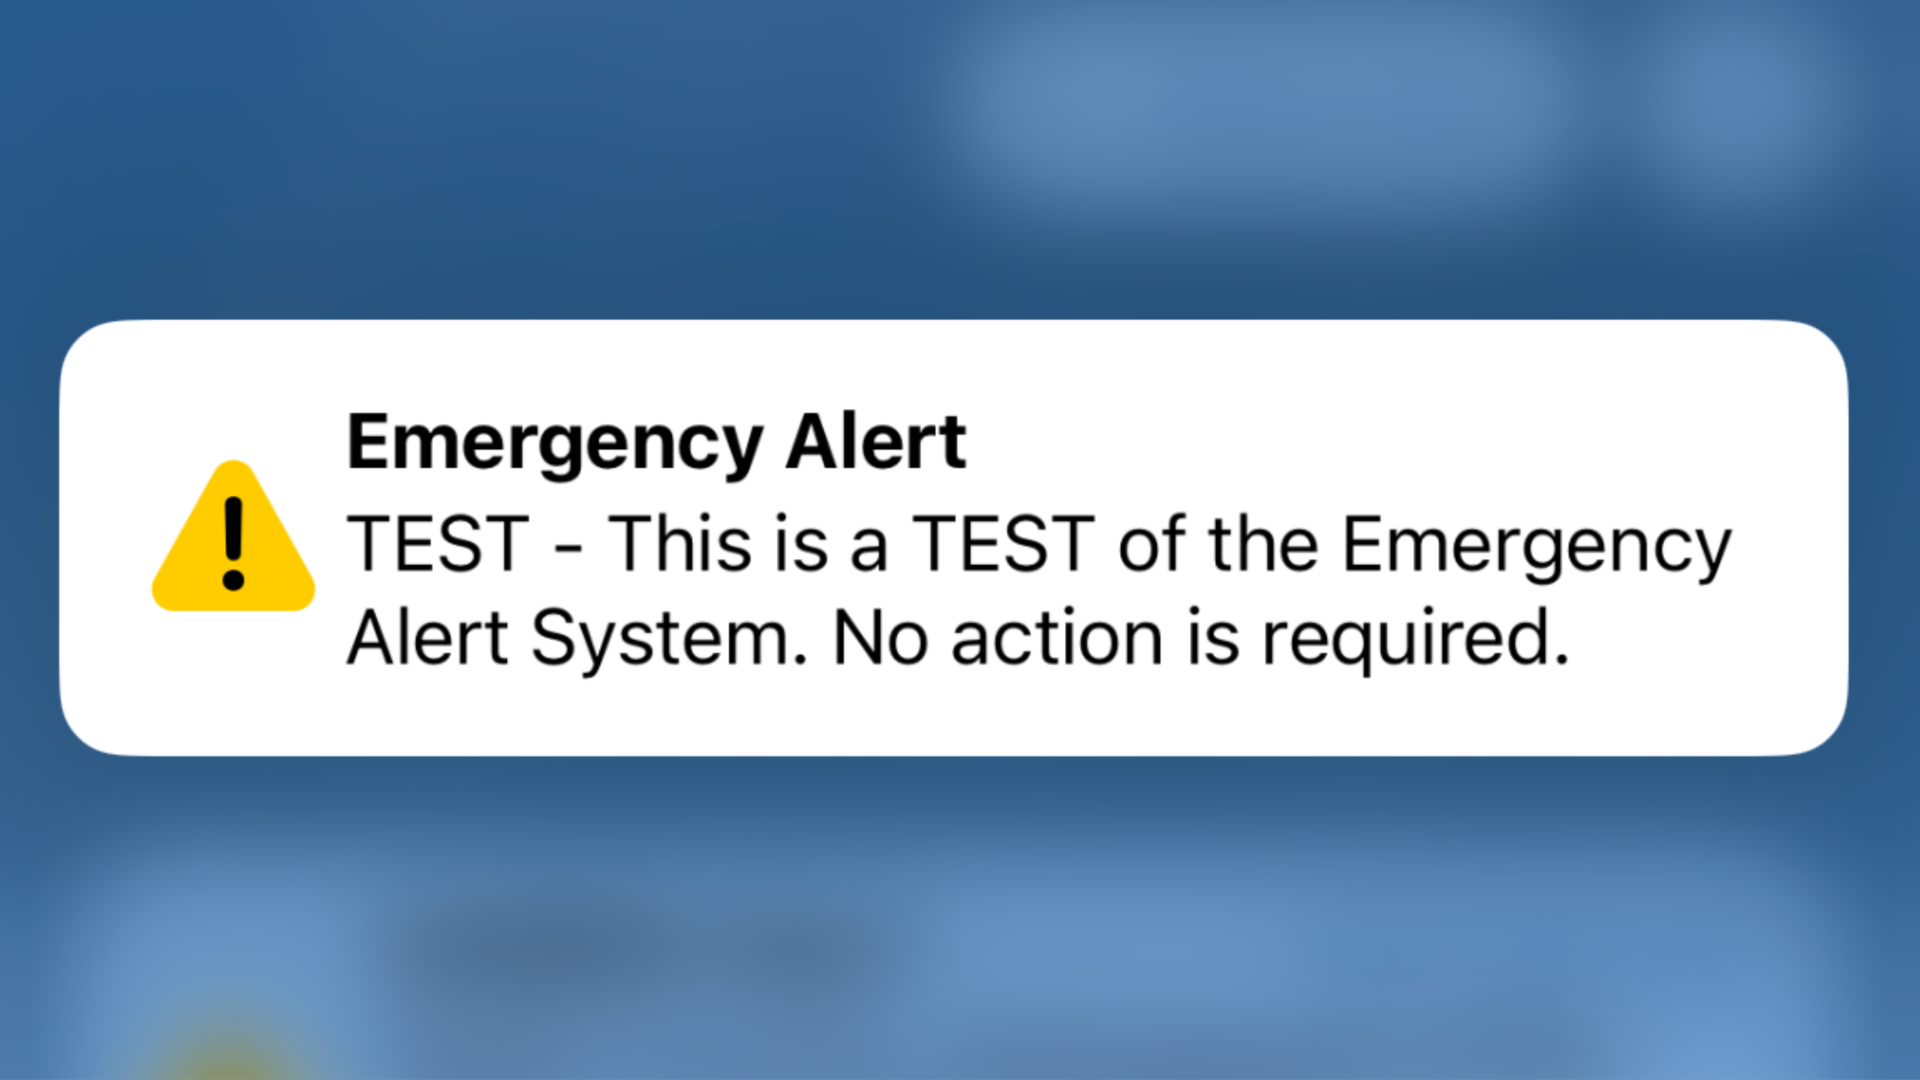 The test emergency alert that Floridians received before 5am Wednesday. 